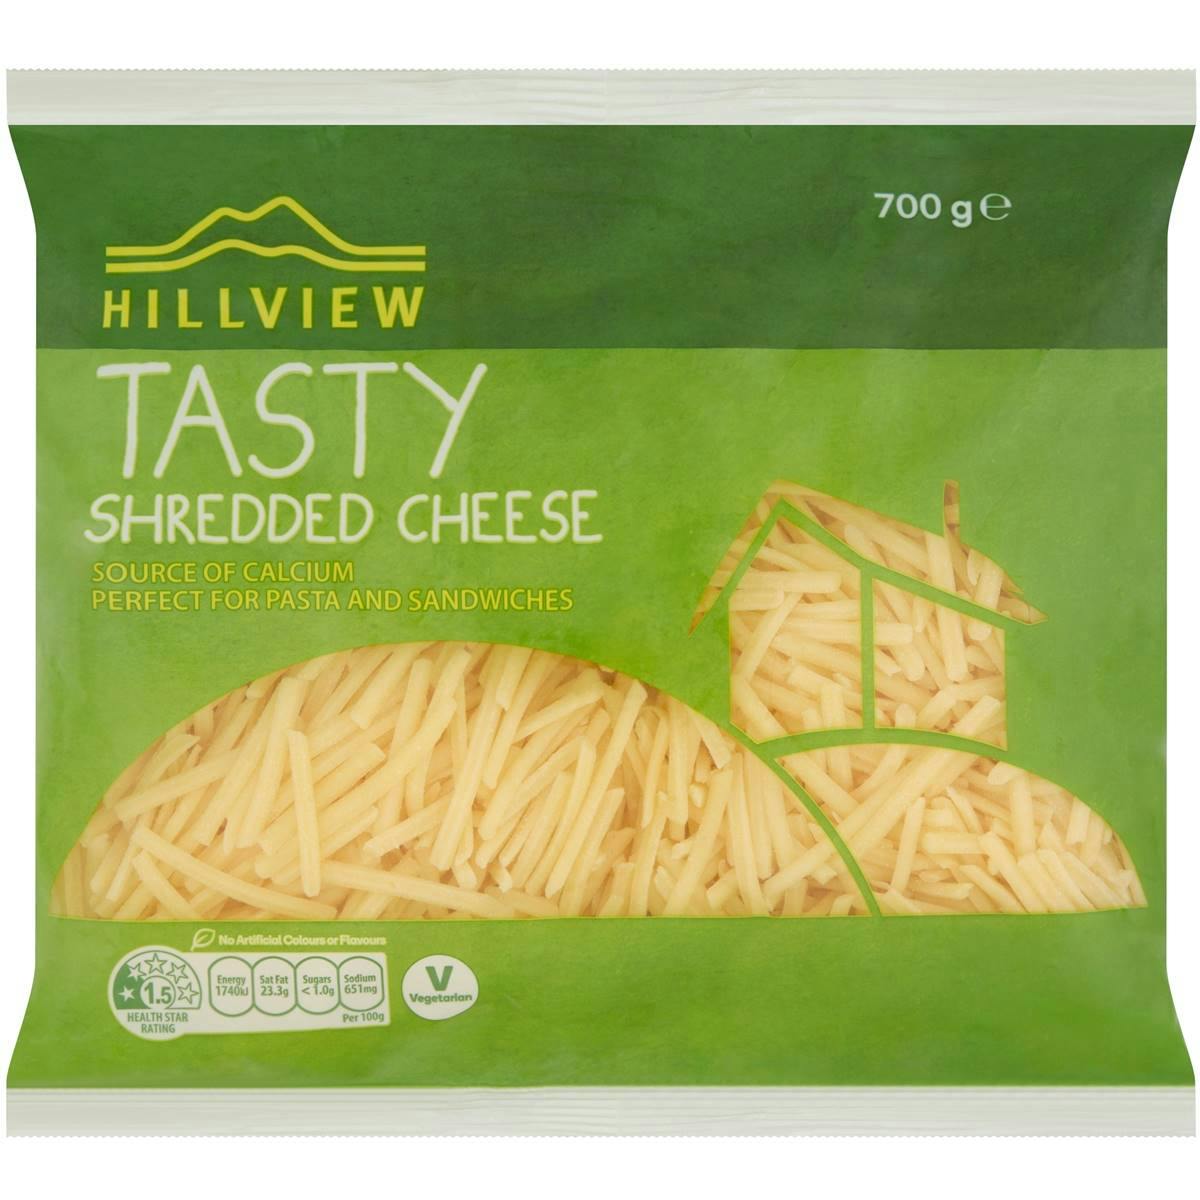 Hillview Tasty Shredded Cheese